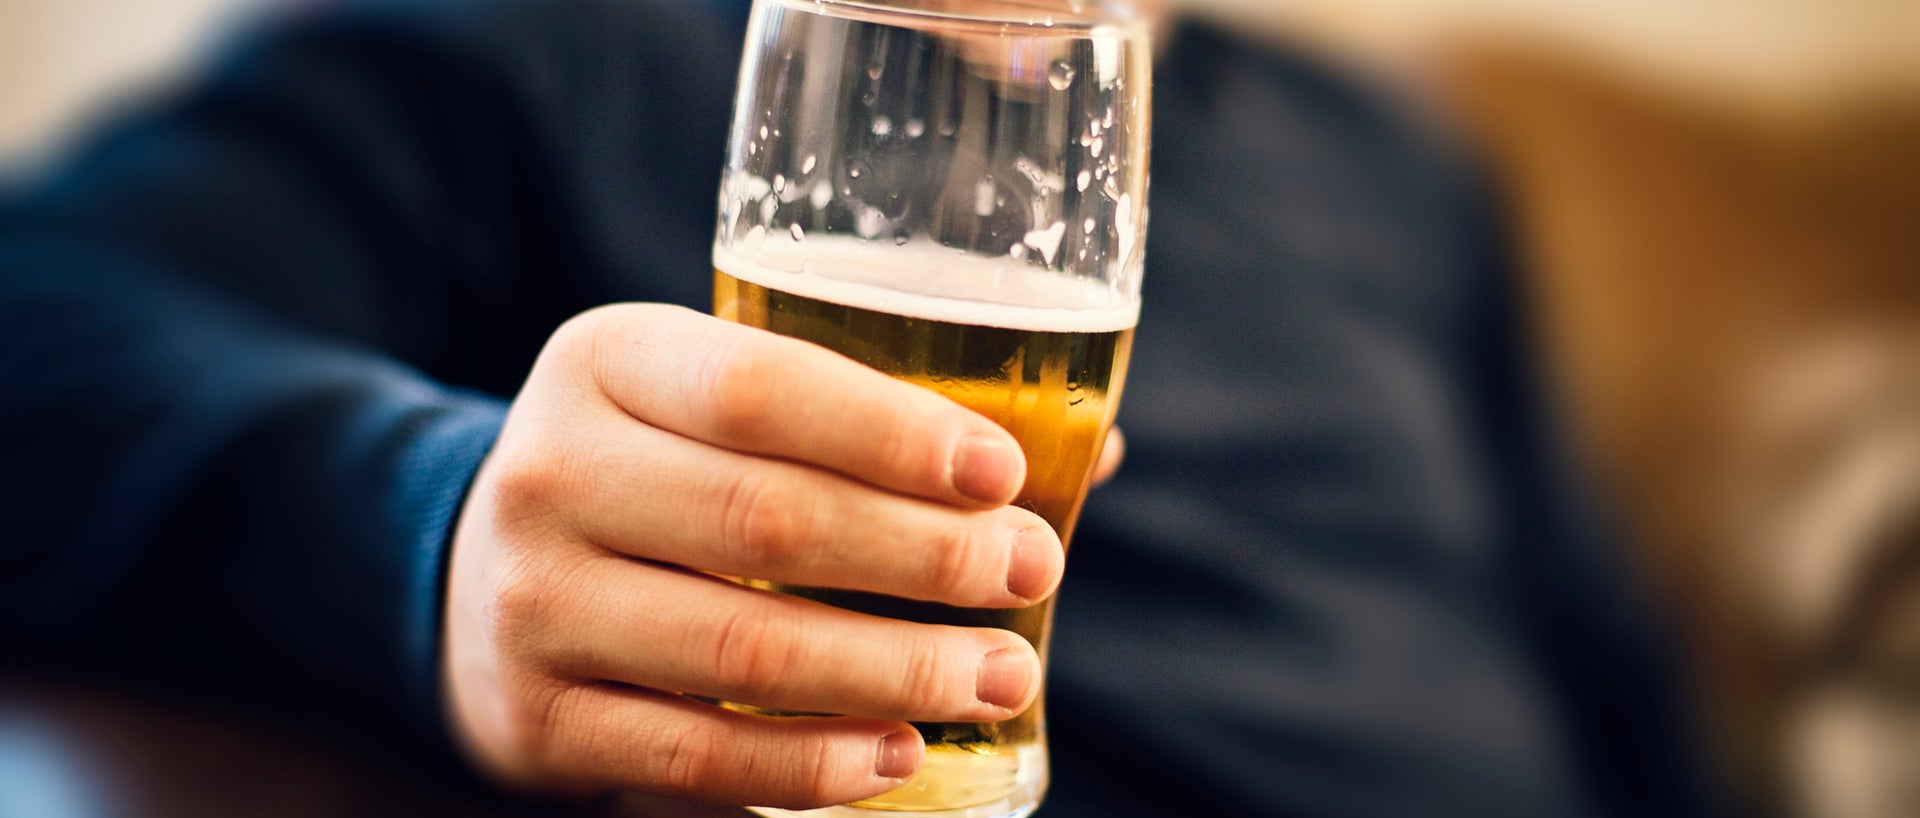 Hand holding a glass of beer